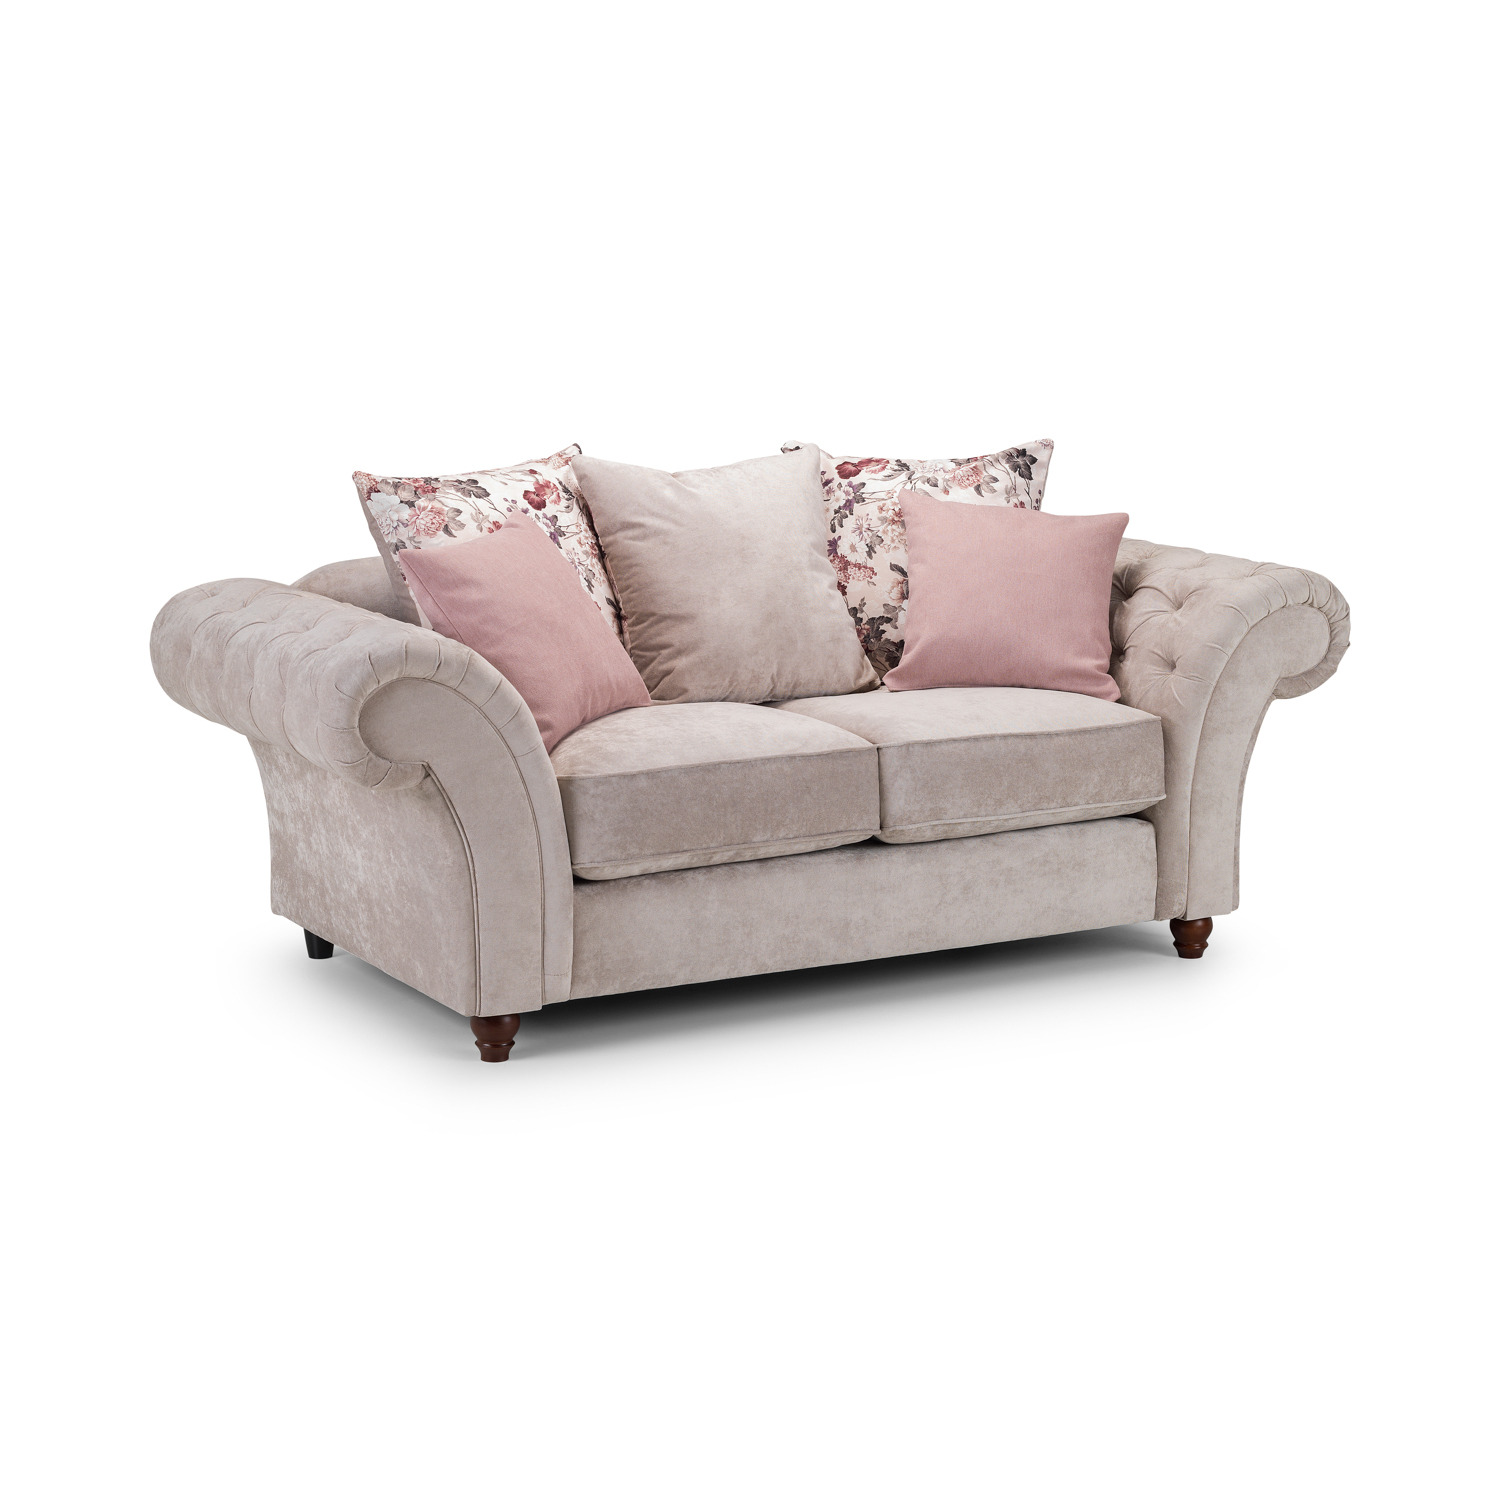 Roma Chesterfield Sofa Beige 2 Seater - image 1